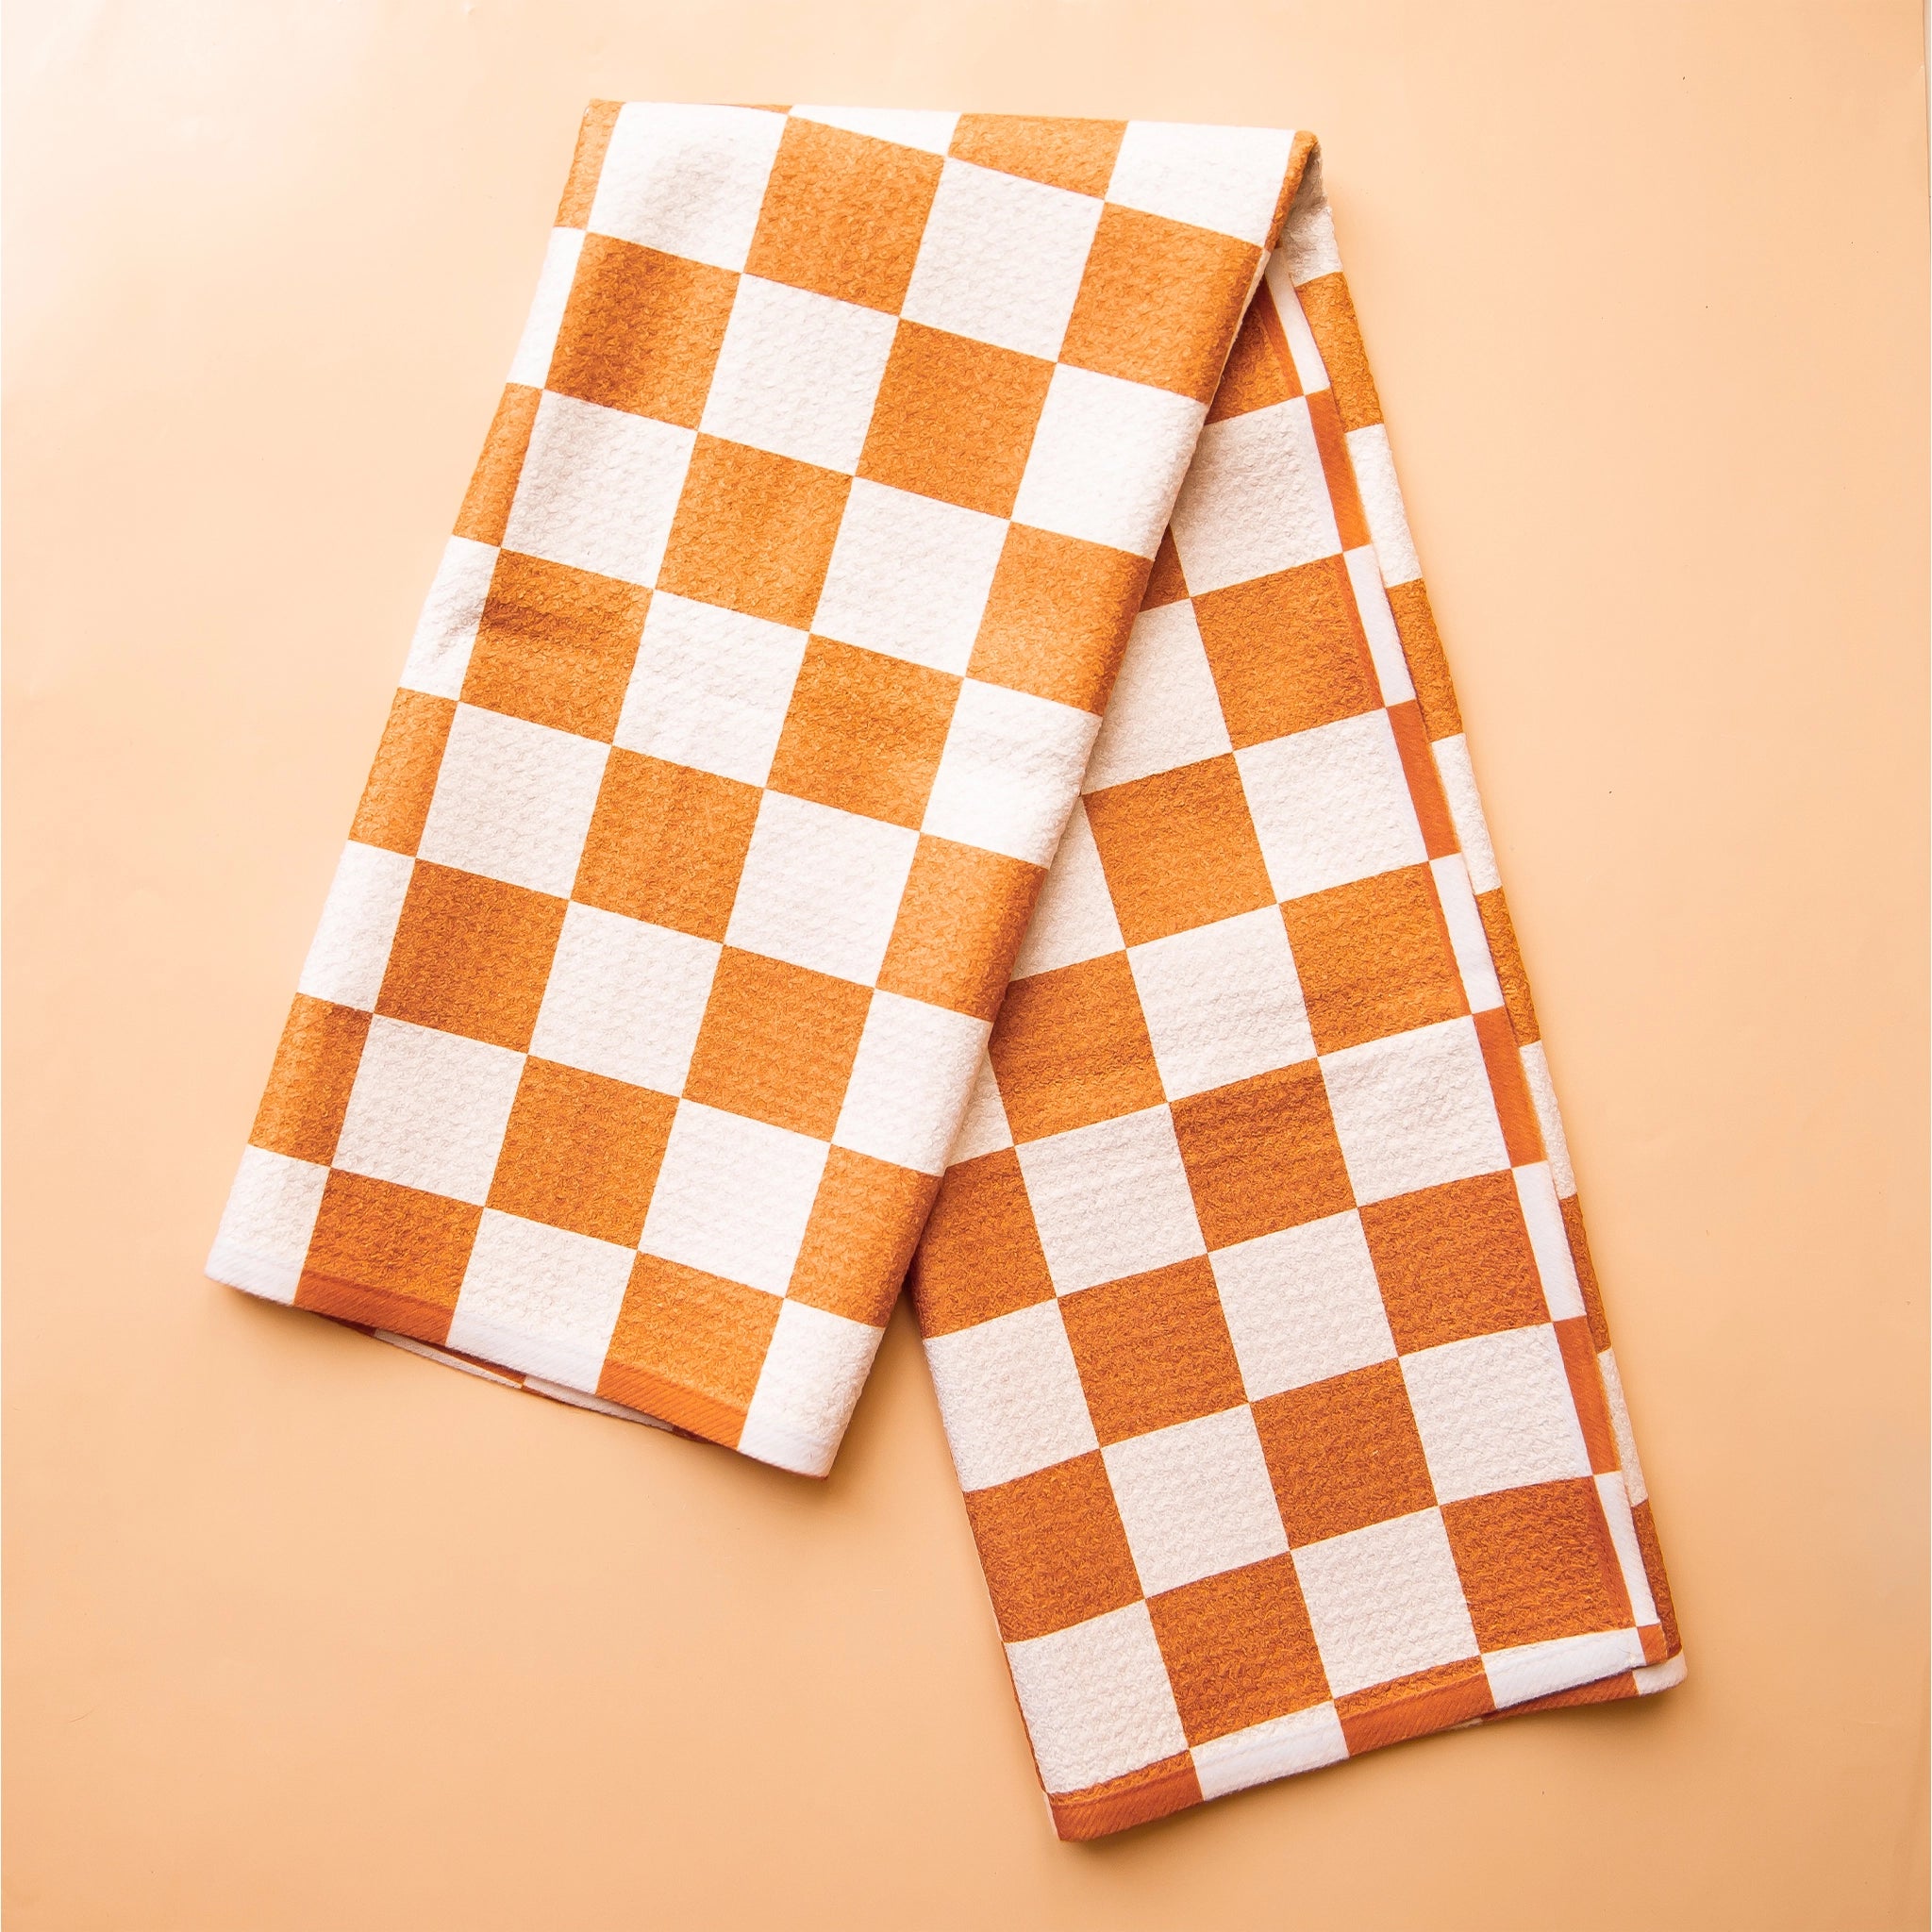 On an orange backdrop is an orange and ivory checkered kitchen towel.